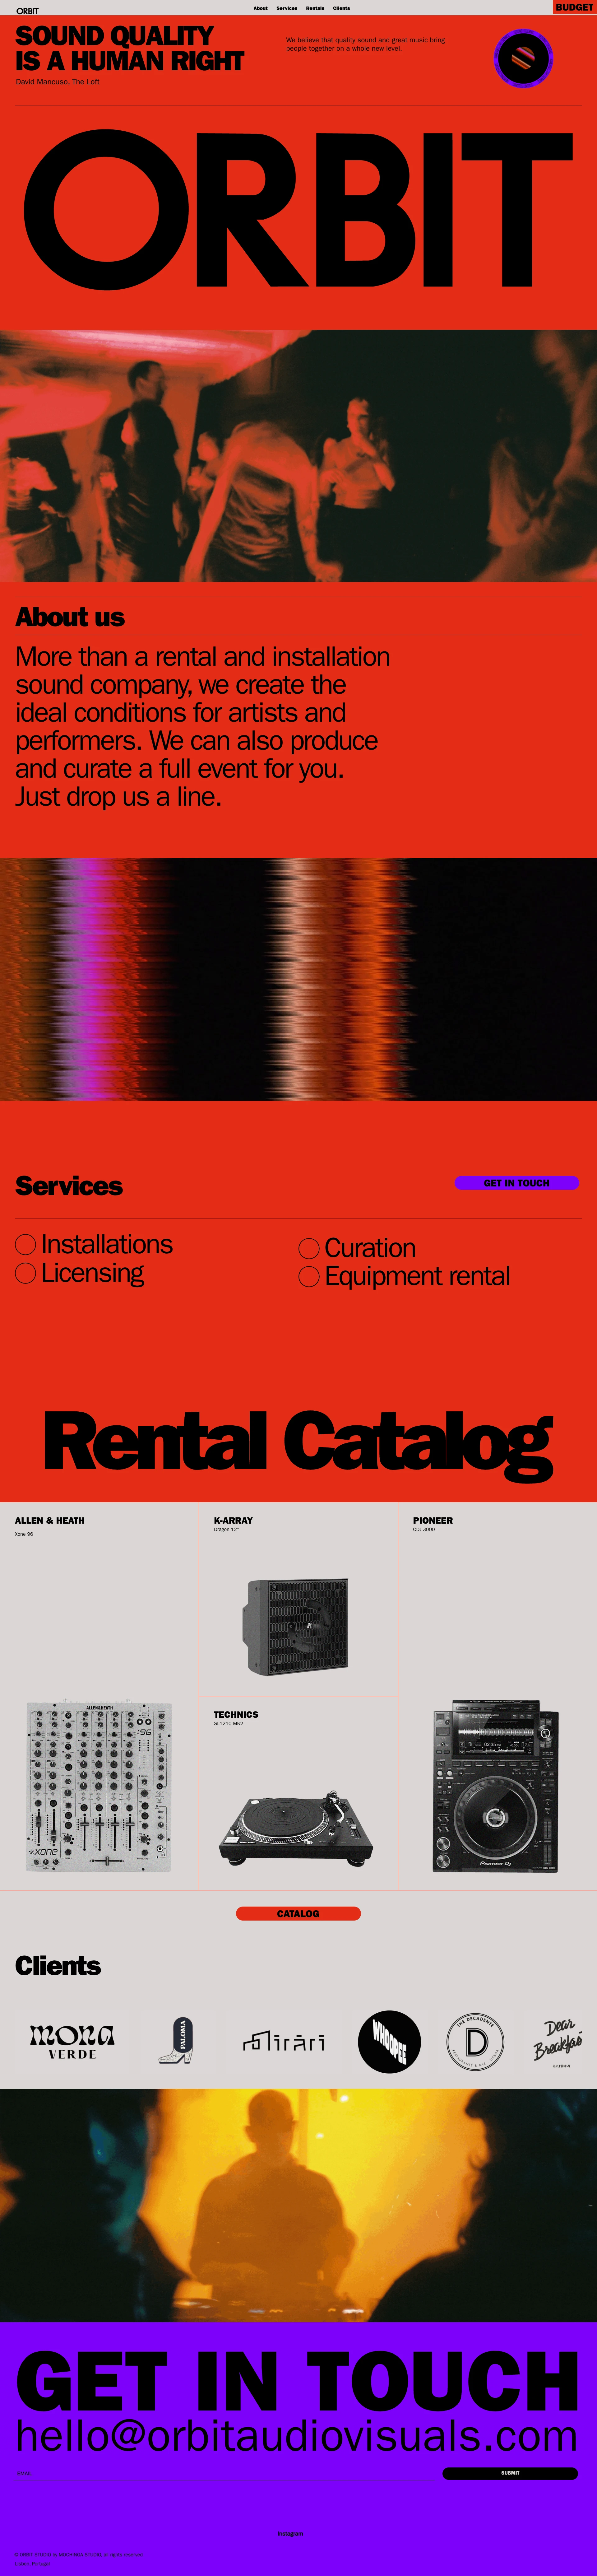 ORBIT Landing Page Example: More than a rental and installation sound company, we create the ideal conditions for artists and performers. We can also produce and curate a full event for you. Just drop us a line.